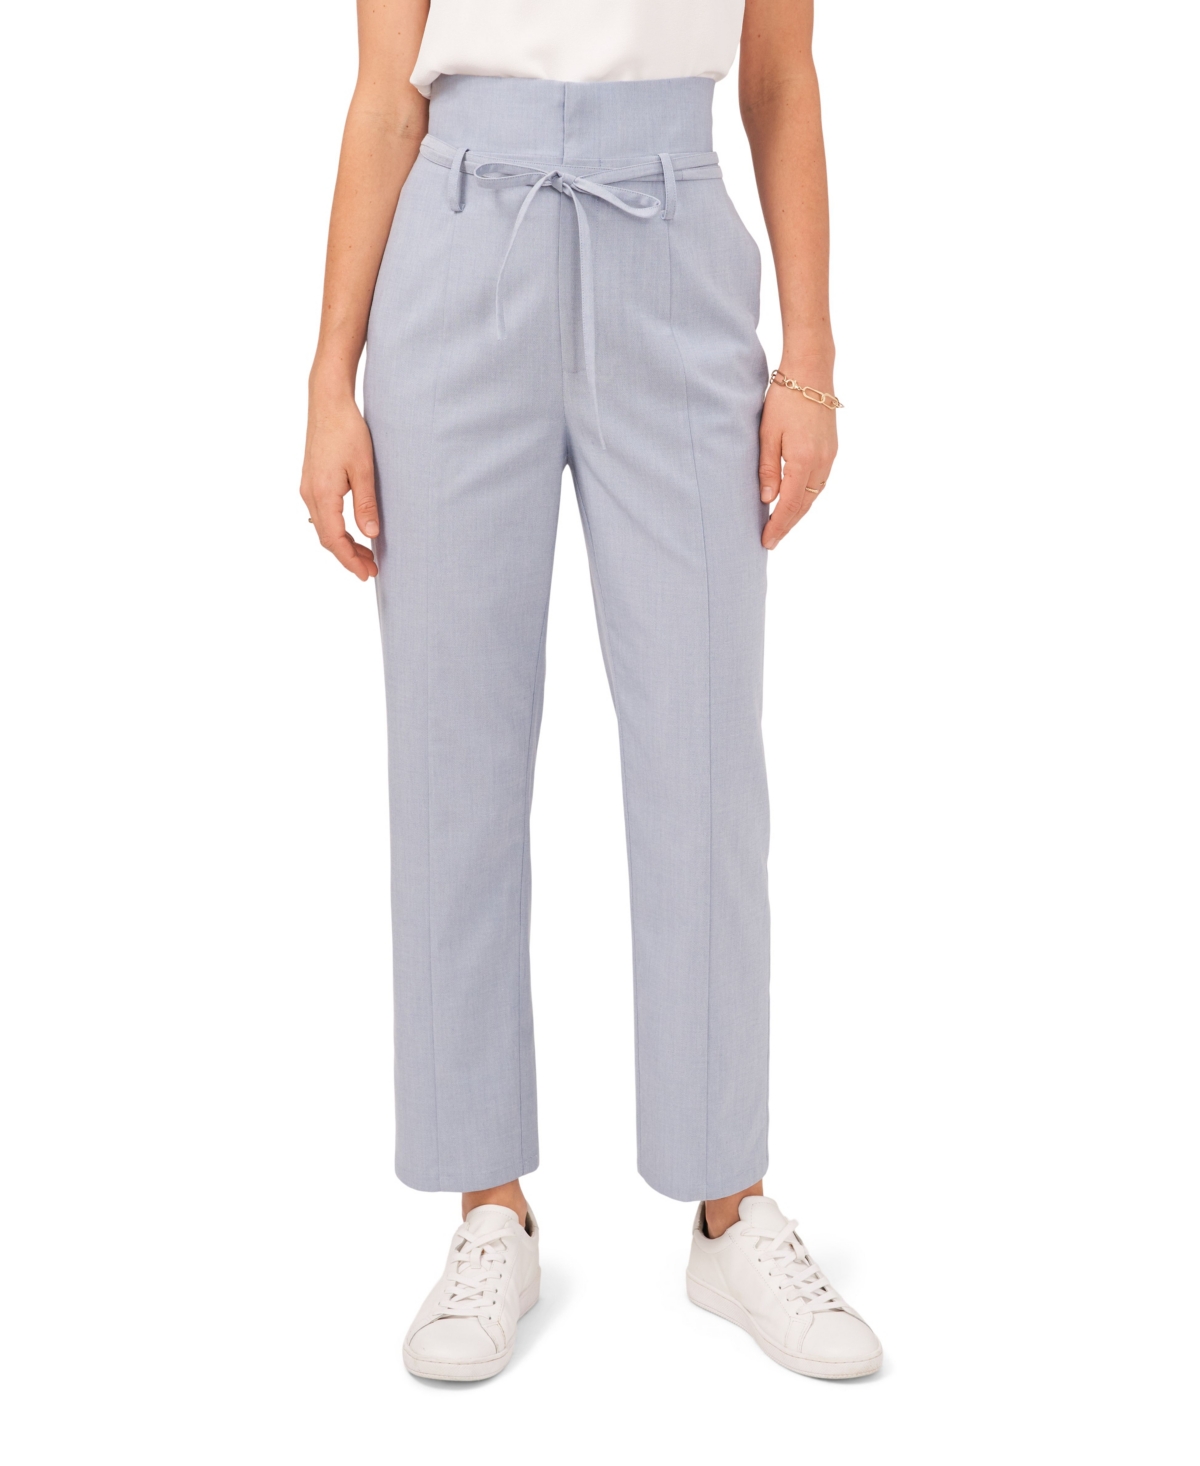  1.state Women's Paper Bag Pants with Self Tie